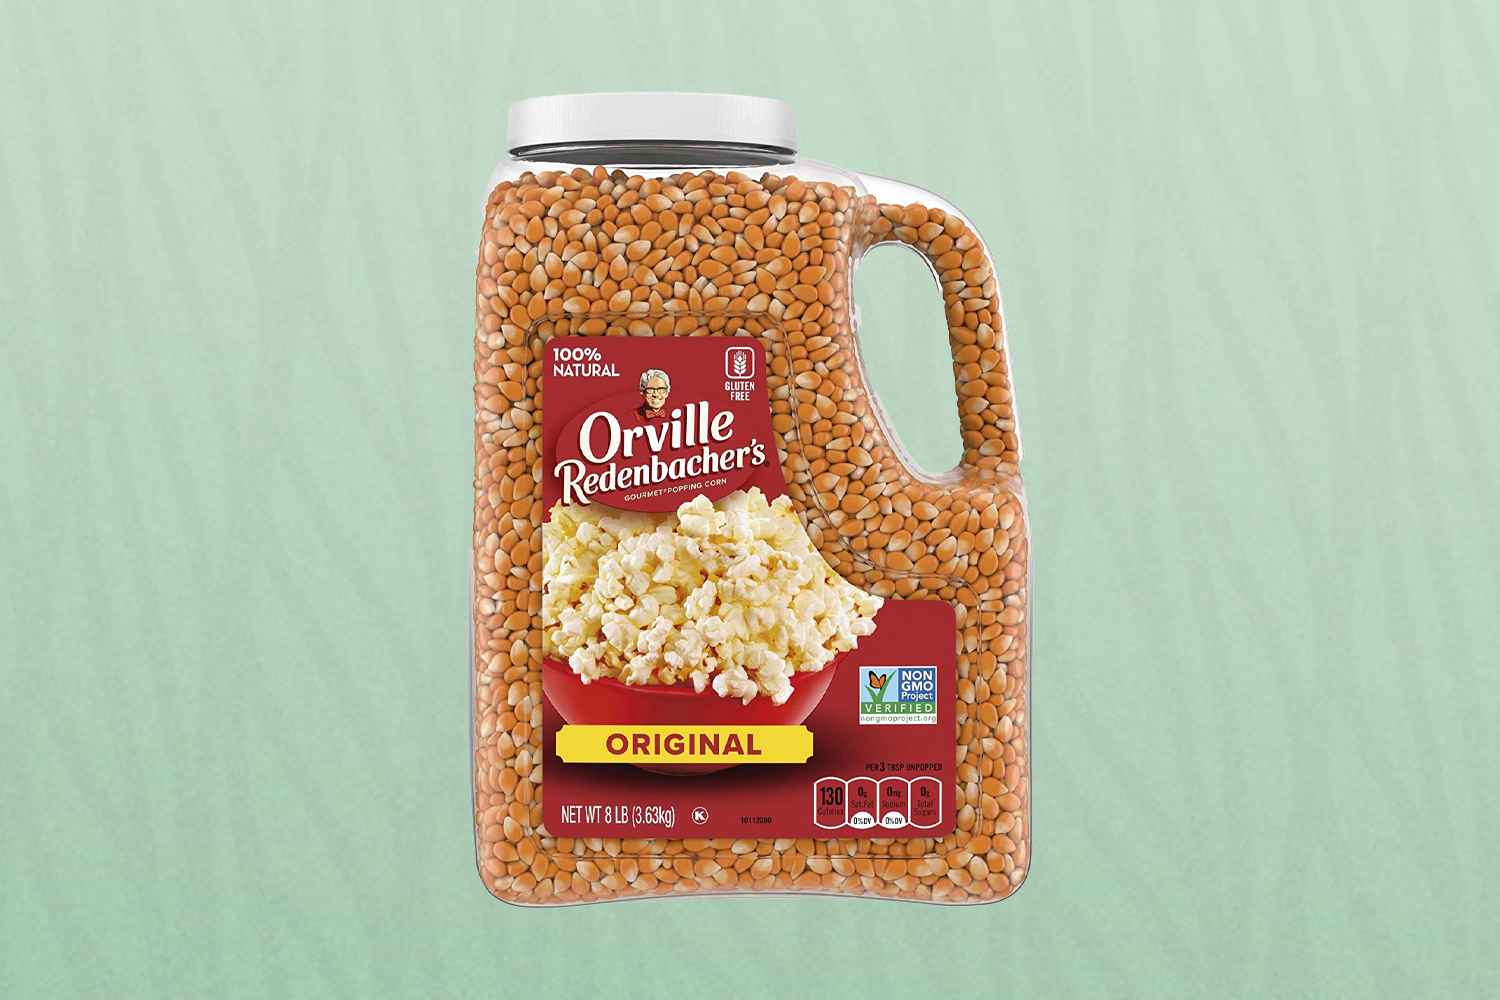 Orville Redenbacher's Gourmet Popcorn Kernels are great for stoners to eat on 4/20 in 2022